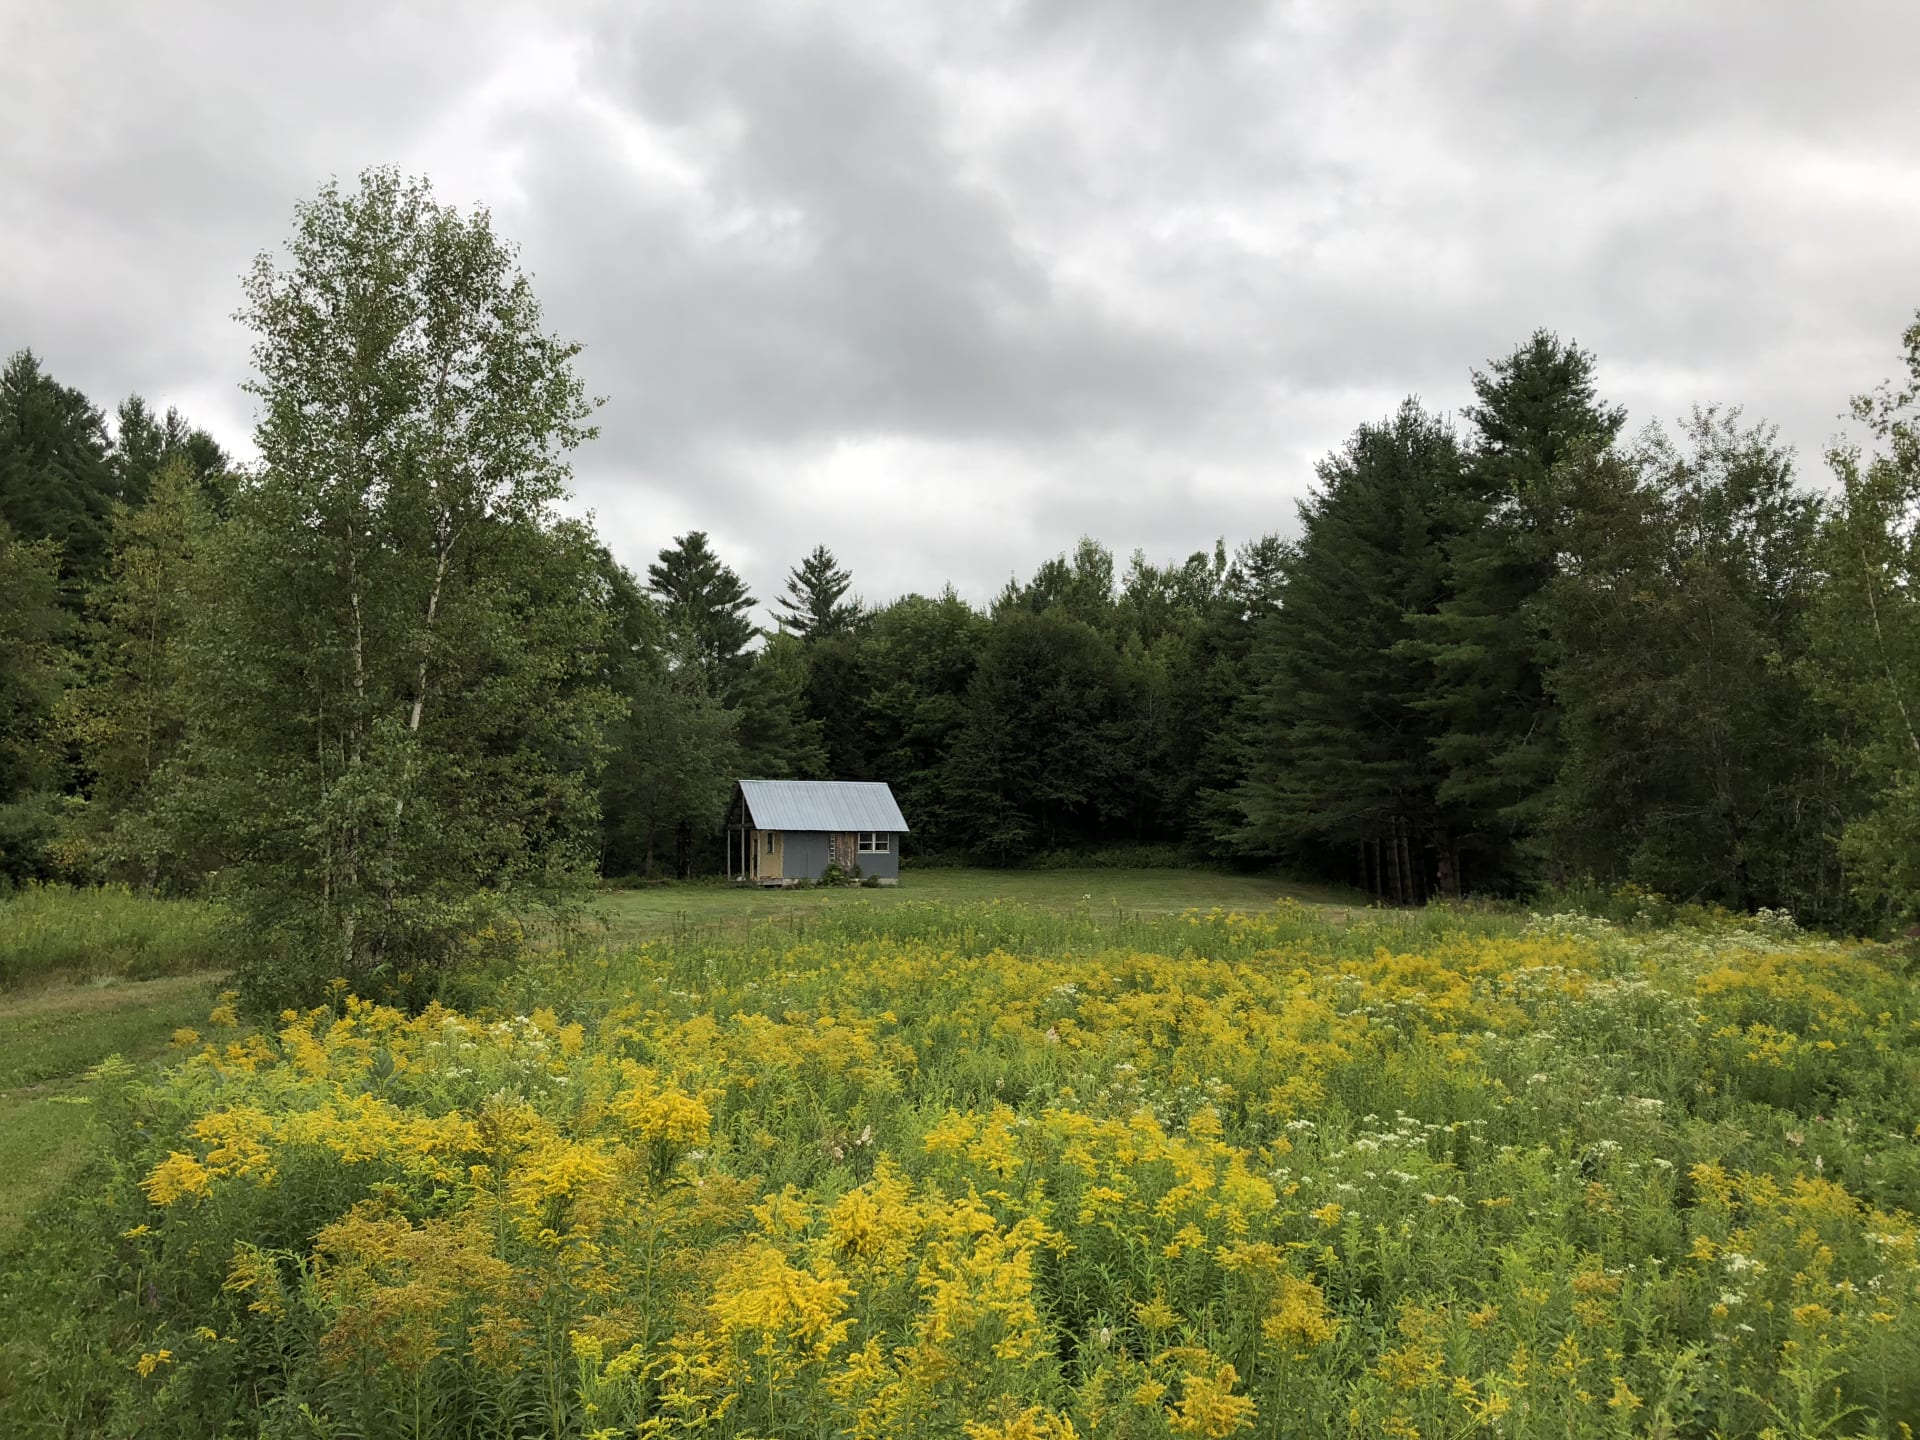 Set in a large field of perennial wildflowers with a large grassy area around the cabin